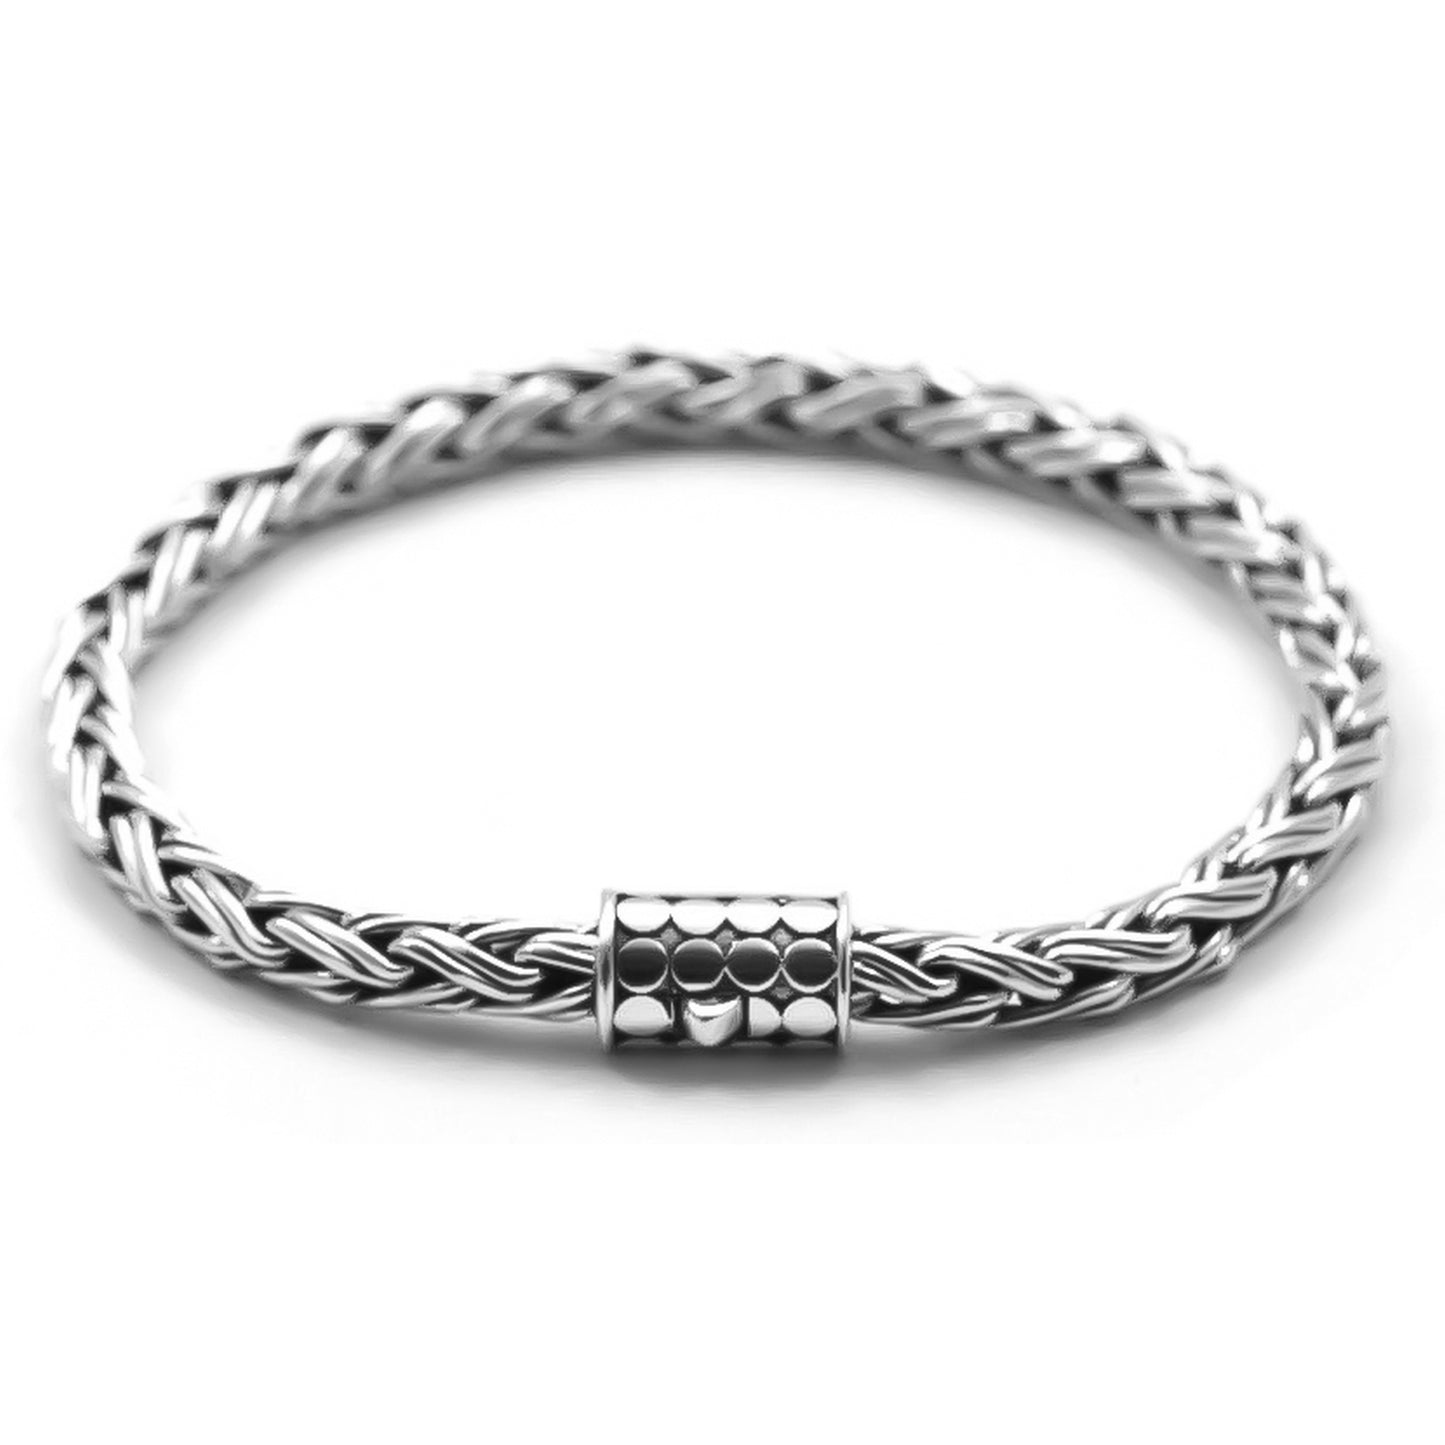 B818 8.5" SOHO .925 Sterling Silver 5mm Square Wheat Chain with Barrel Clasp